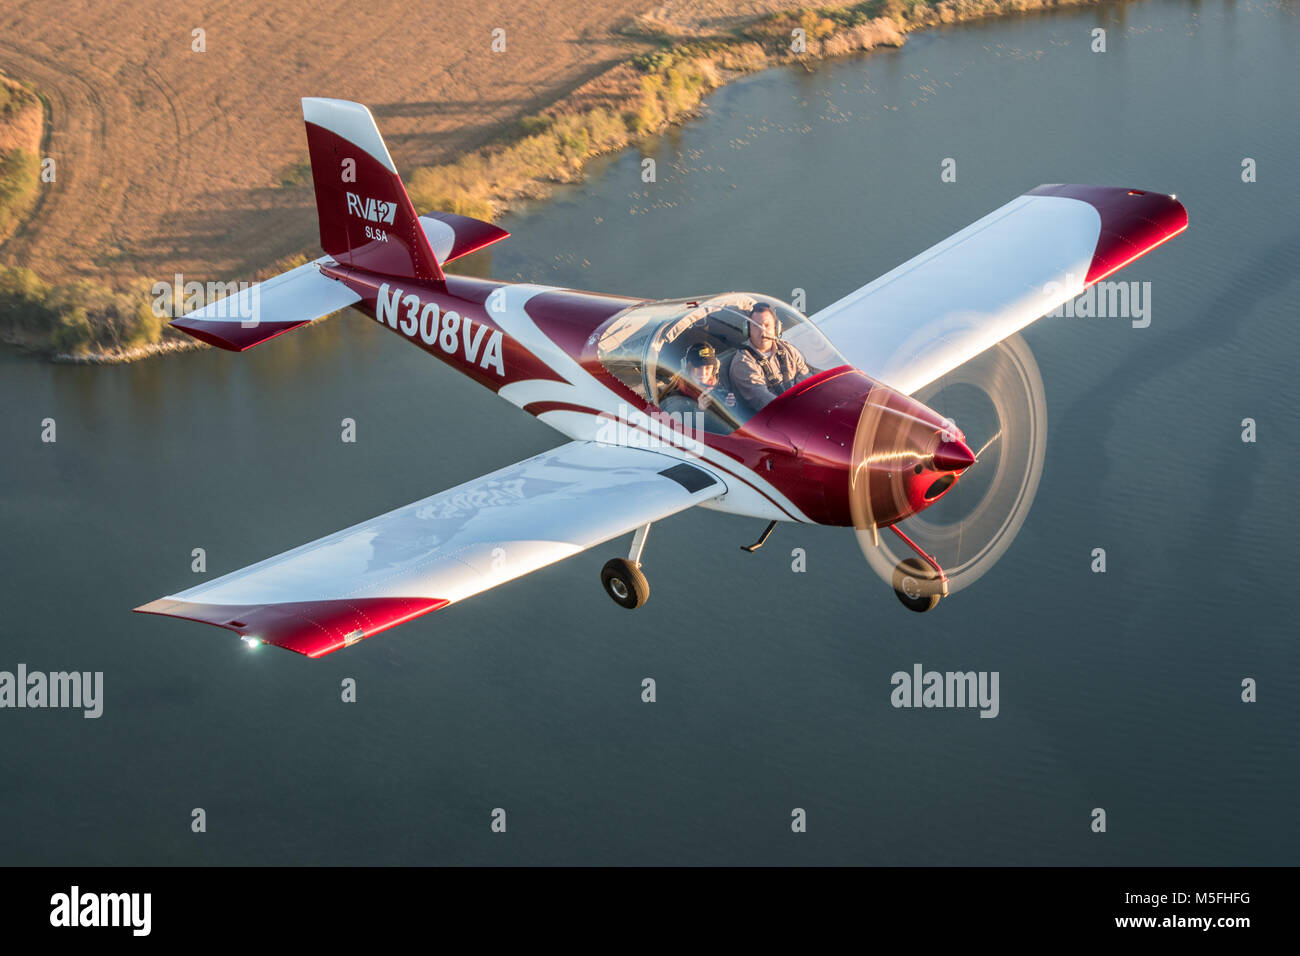 Male pilot operating blue Vans RV-12 light sport aircraft with female photographer flying over the Chesapeake Bay, Stevensville, Maryland. Stock Photo